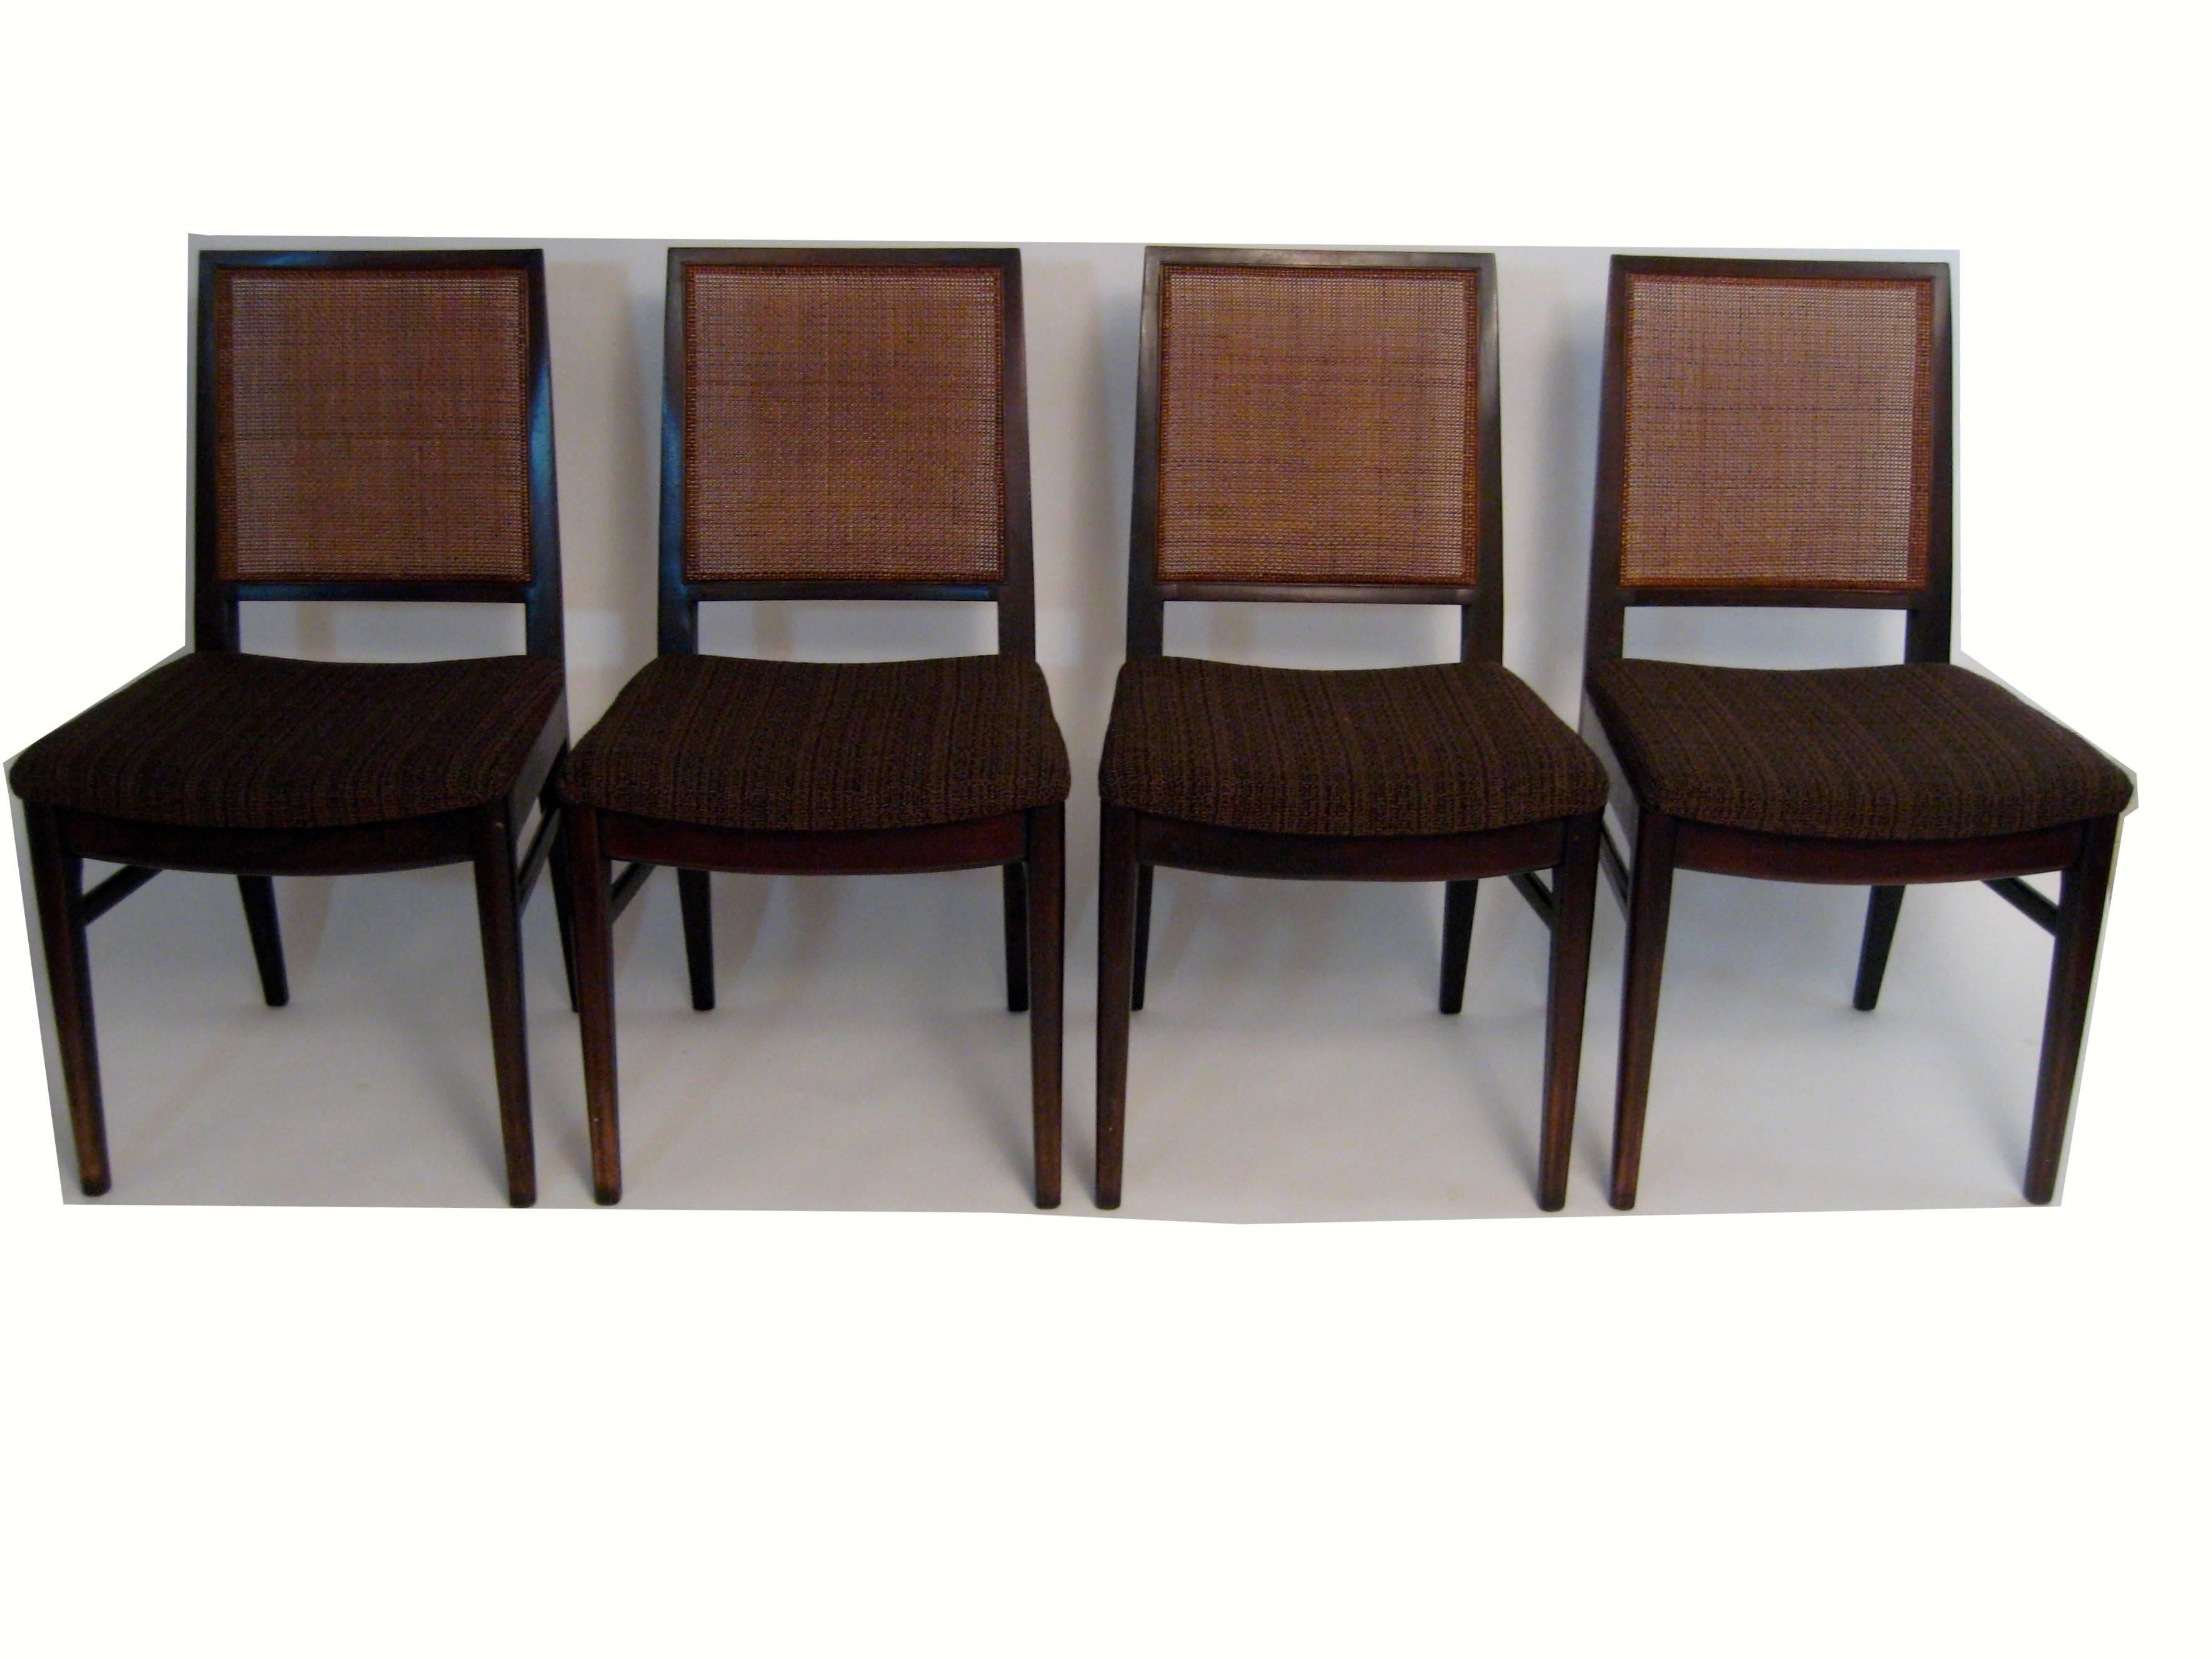 Exquisite set of six chairs retailed at John Stuart in New York City. The set consists of four side chairs with caned backs and upholstered seats and two armchairs with upholstered seats and backs. Solid walnut construction. Original, good dark